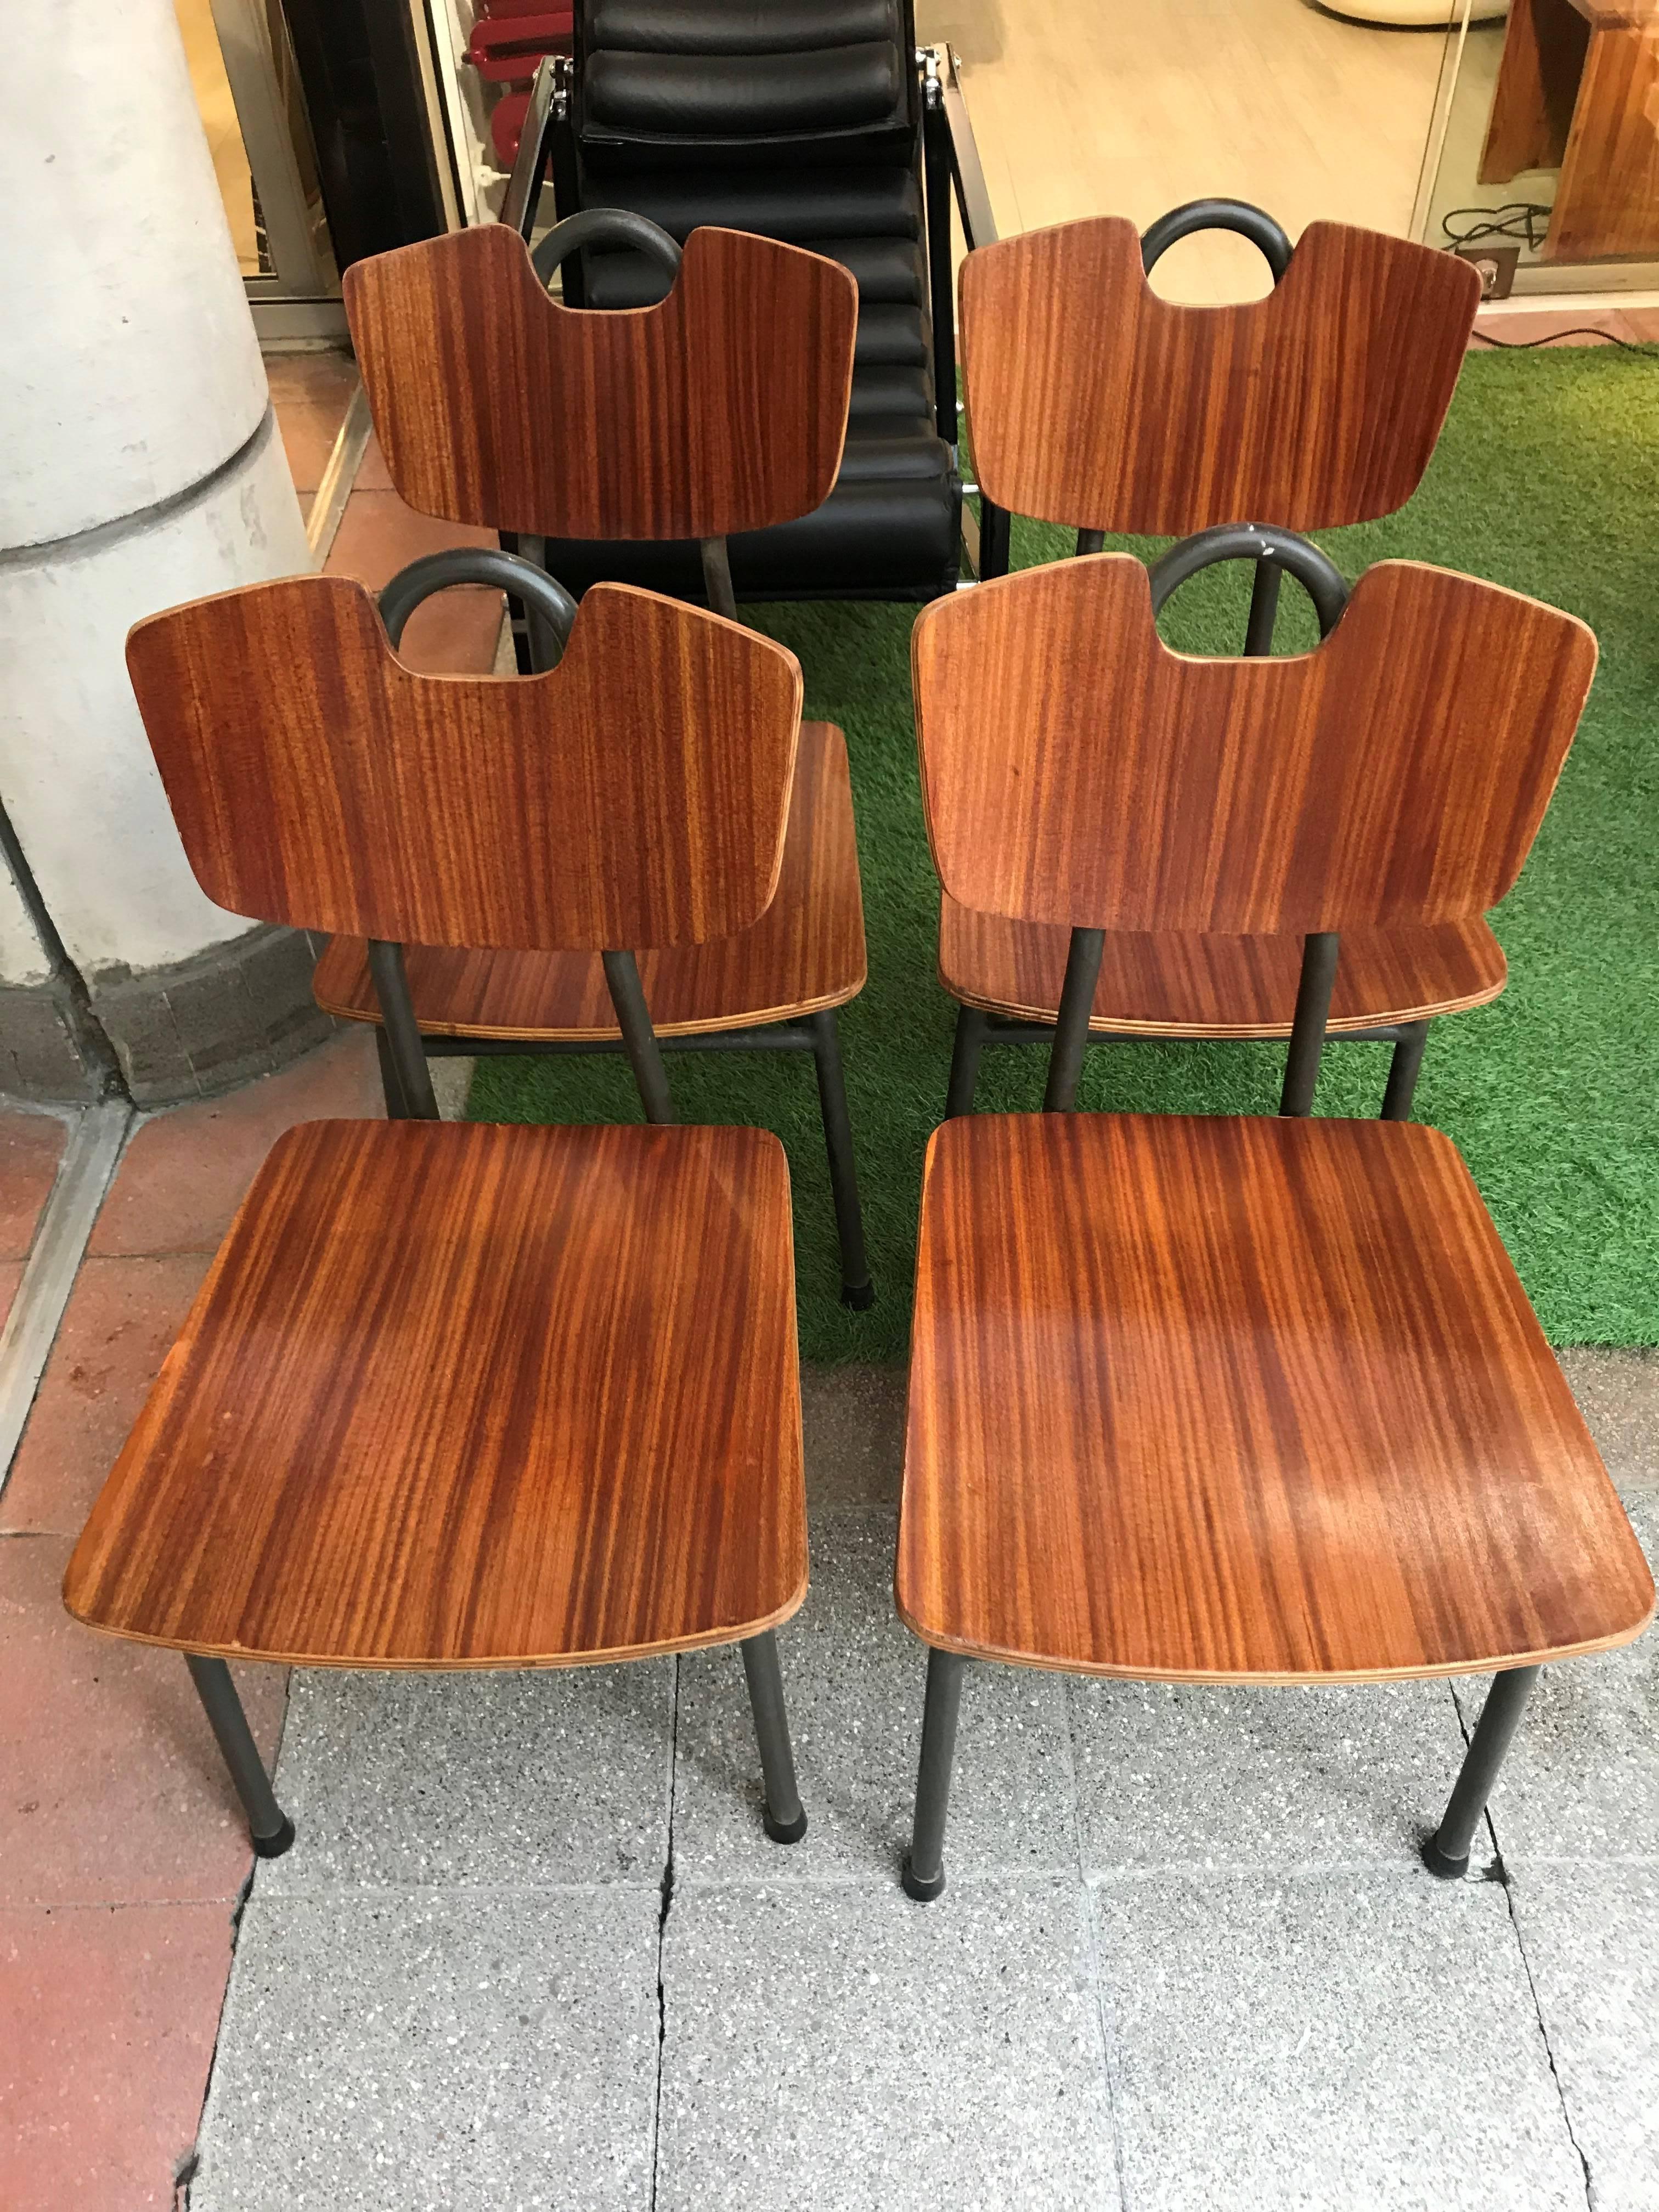 Prefacto by Pierre Guariche
Very rare suite of four chairs
Airborne Publisher 1951
Dimensions: 80 x 42 x 48 cm
Mahogany and metal
Mythical and very rare
Beautiful condition
Sending neatly.